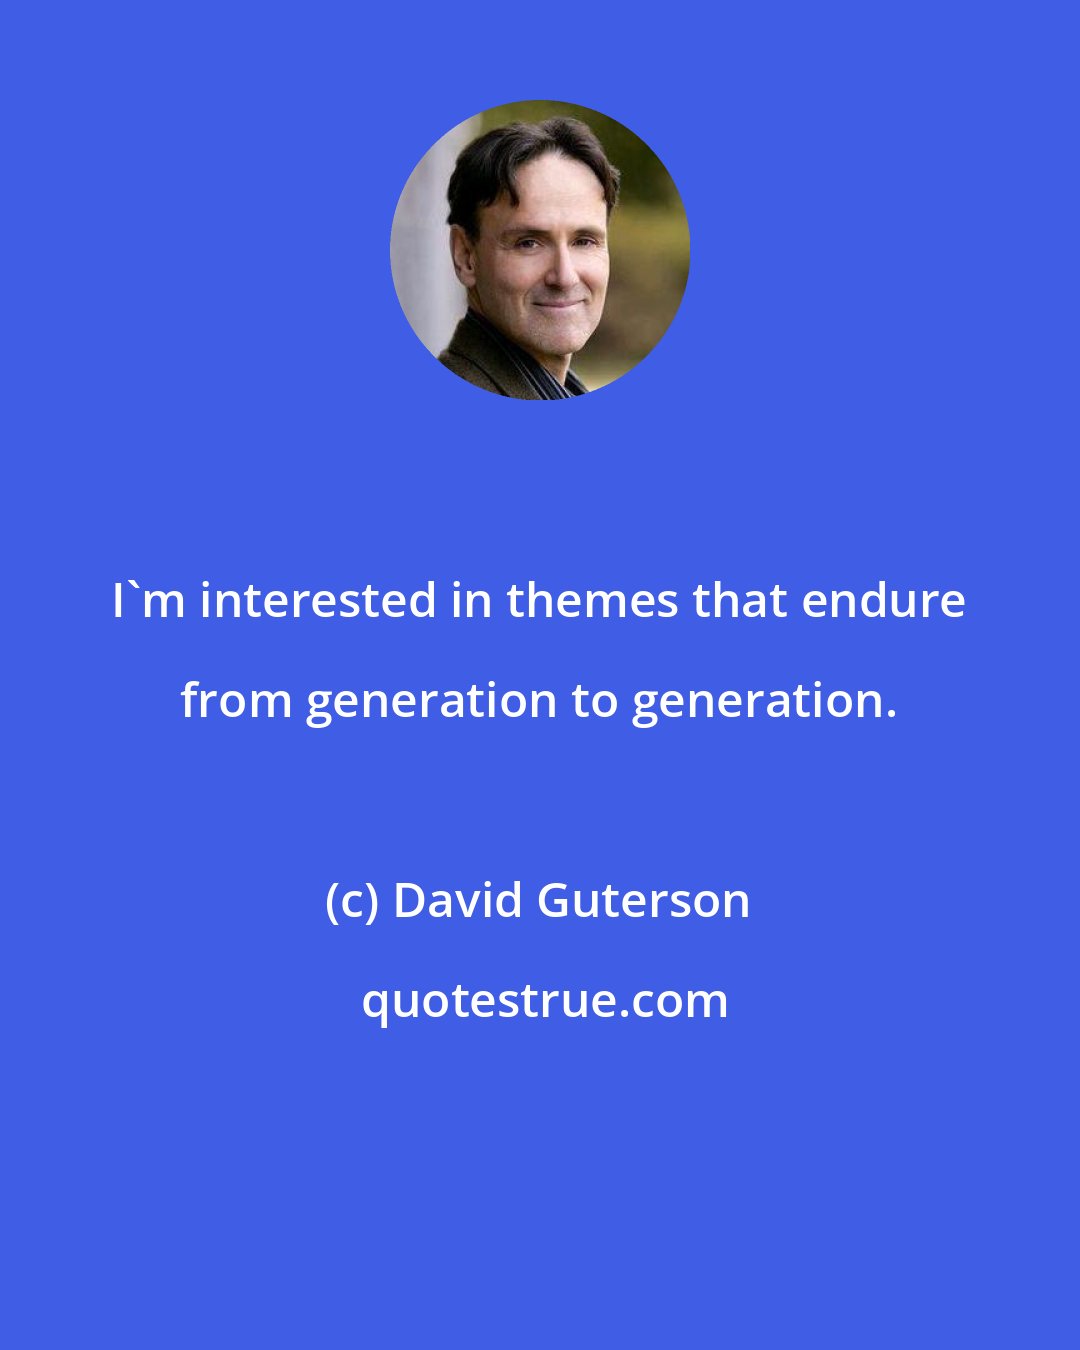 David Guterson: I'm interested in themes that endure from generation to generation.